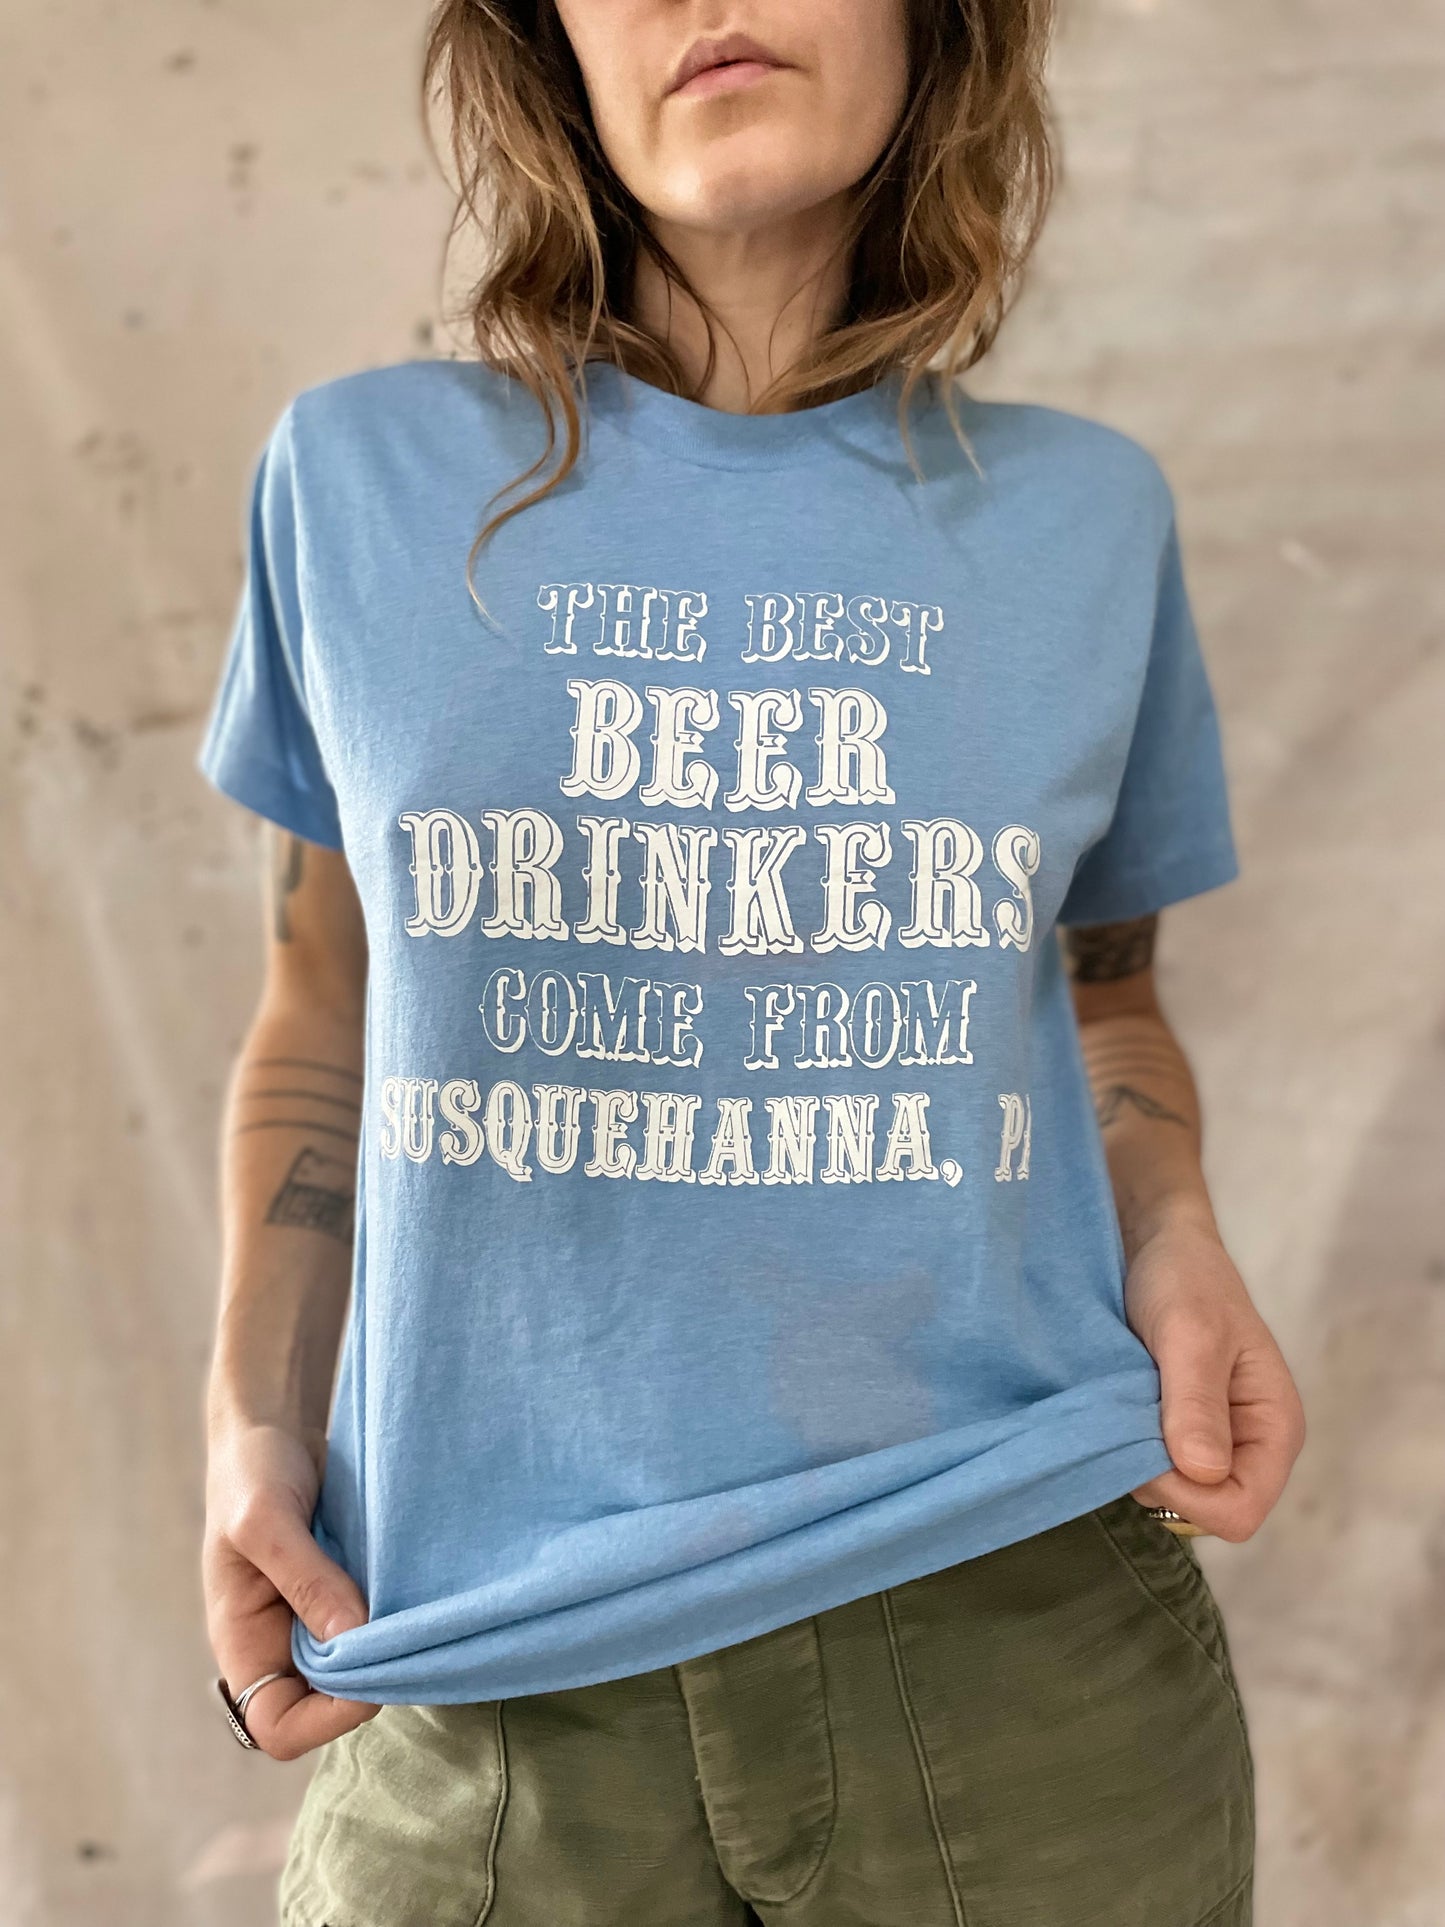 The Best Beer Drinkers Come From Susquehanna, PA Tee